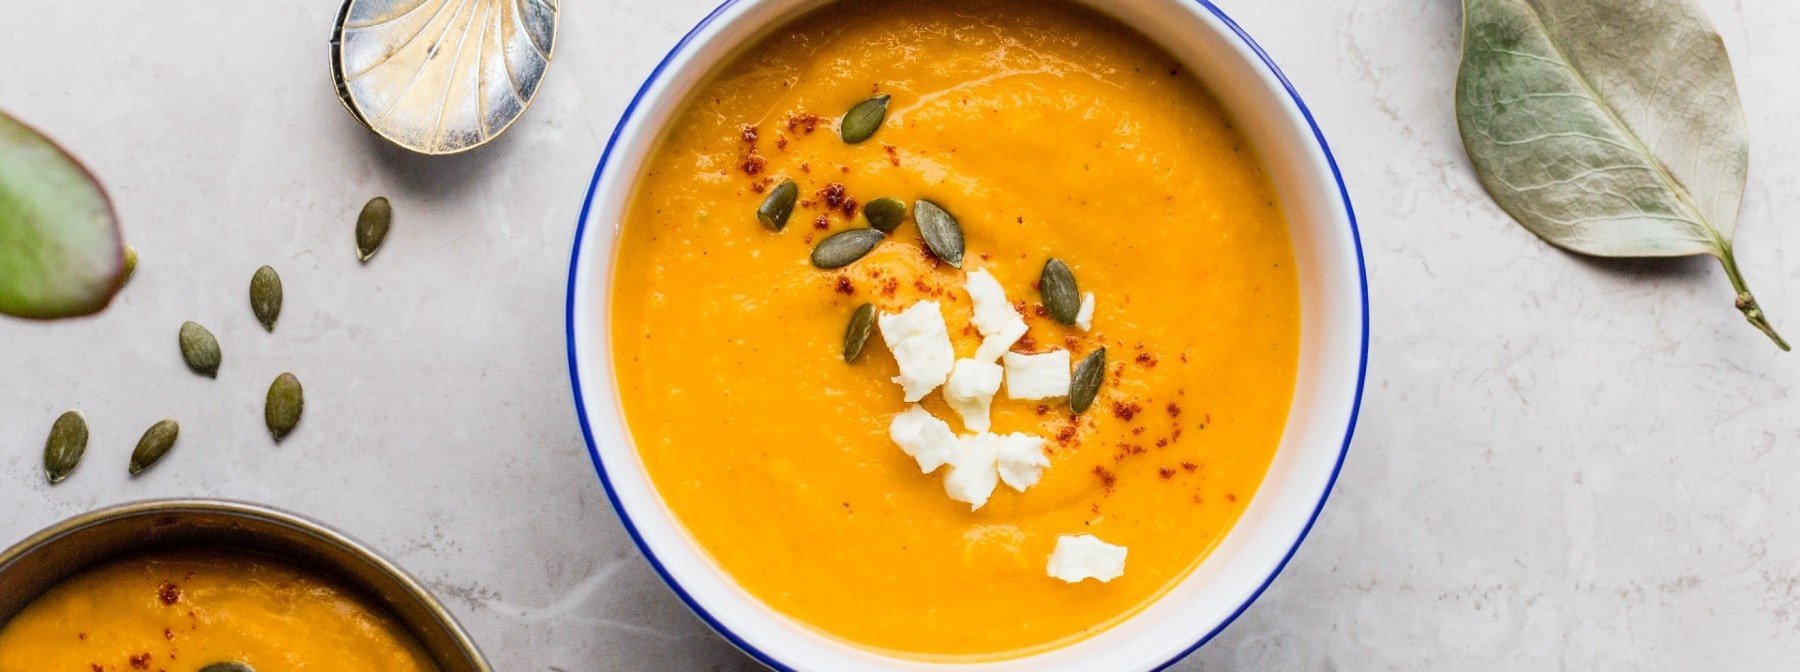 How Healthy Is The Soup Diet?